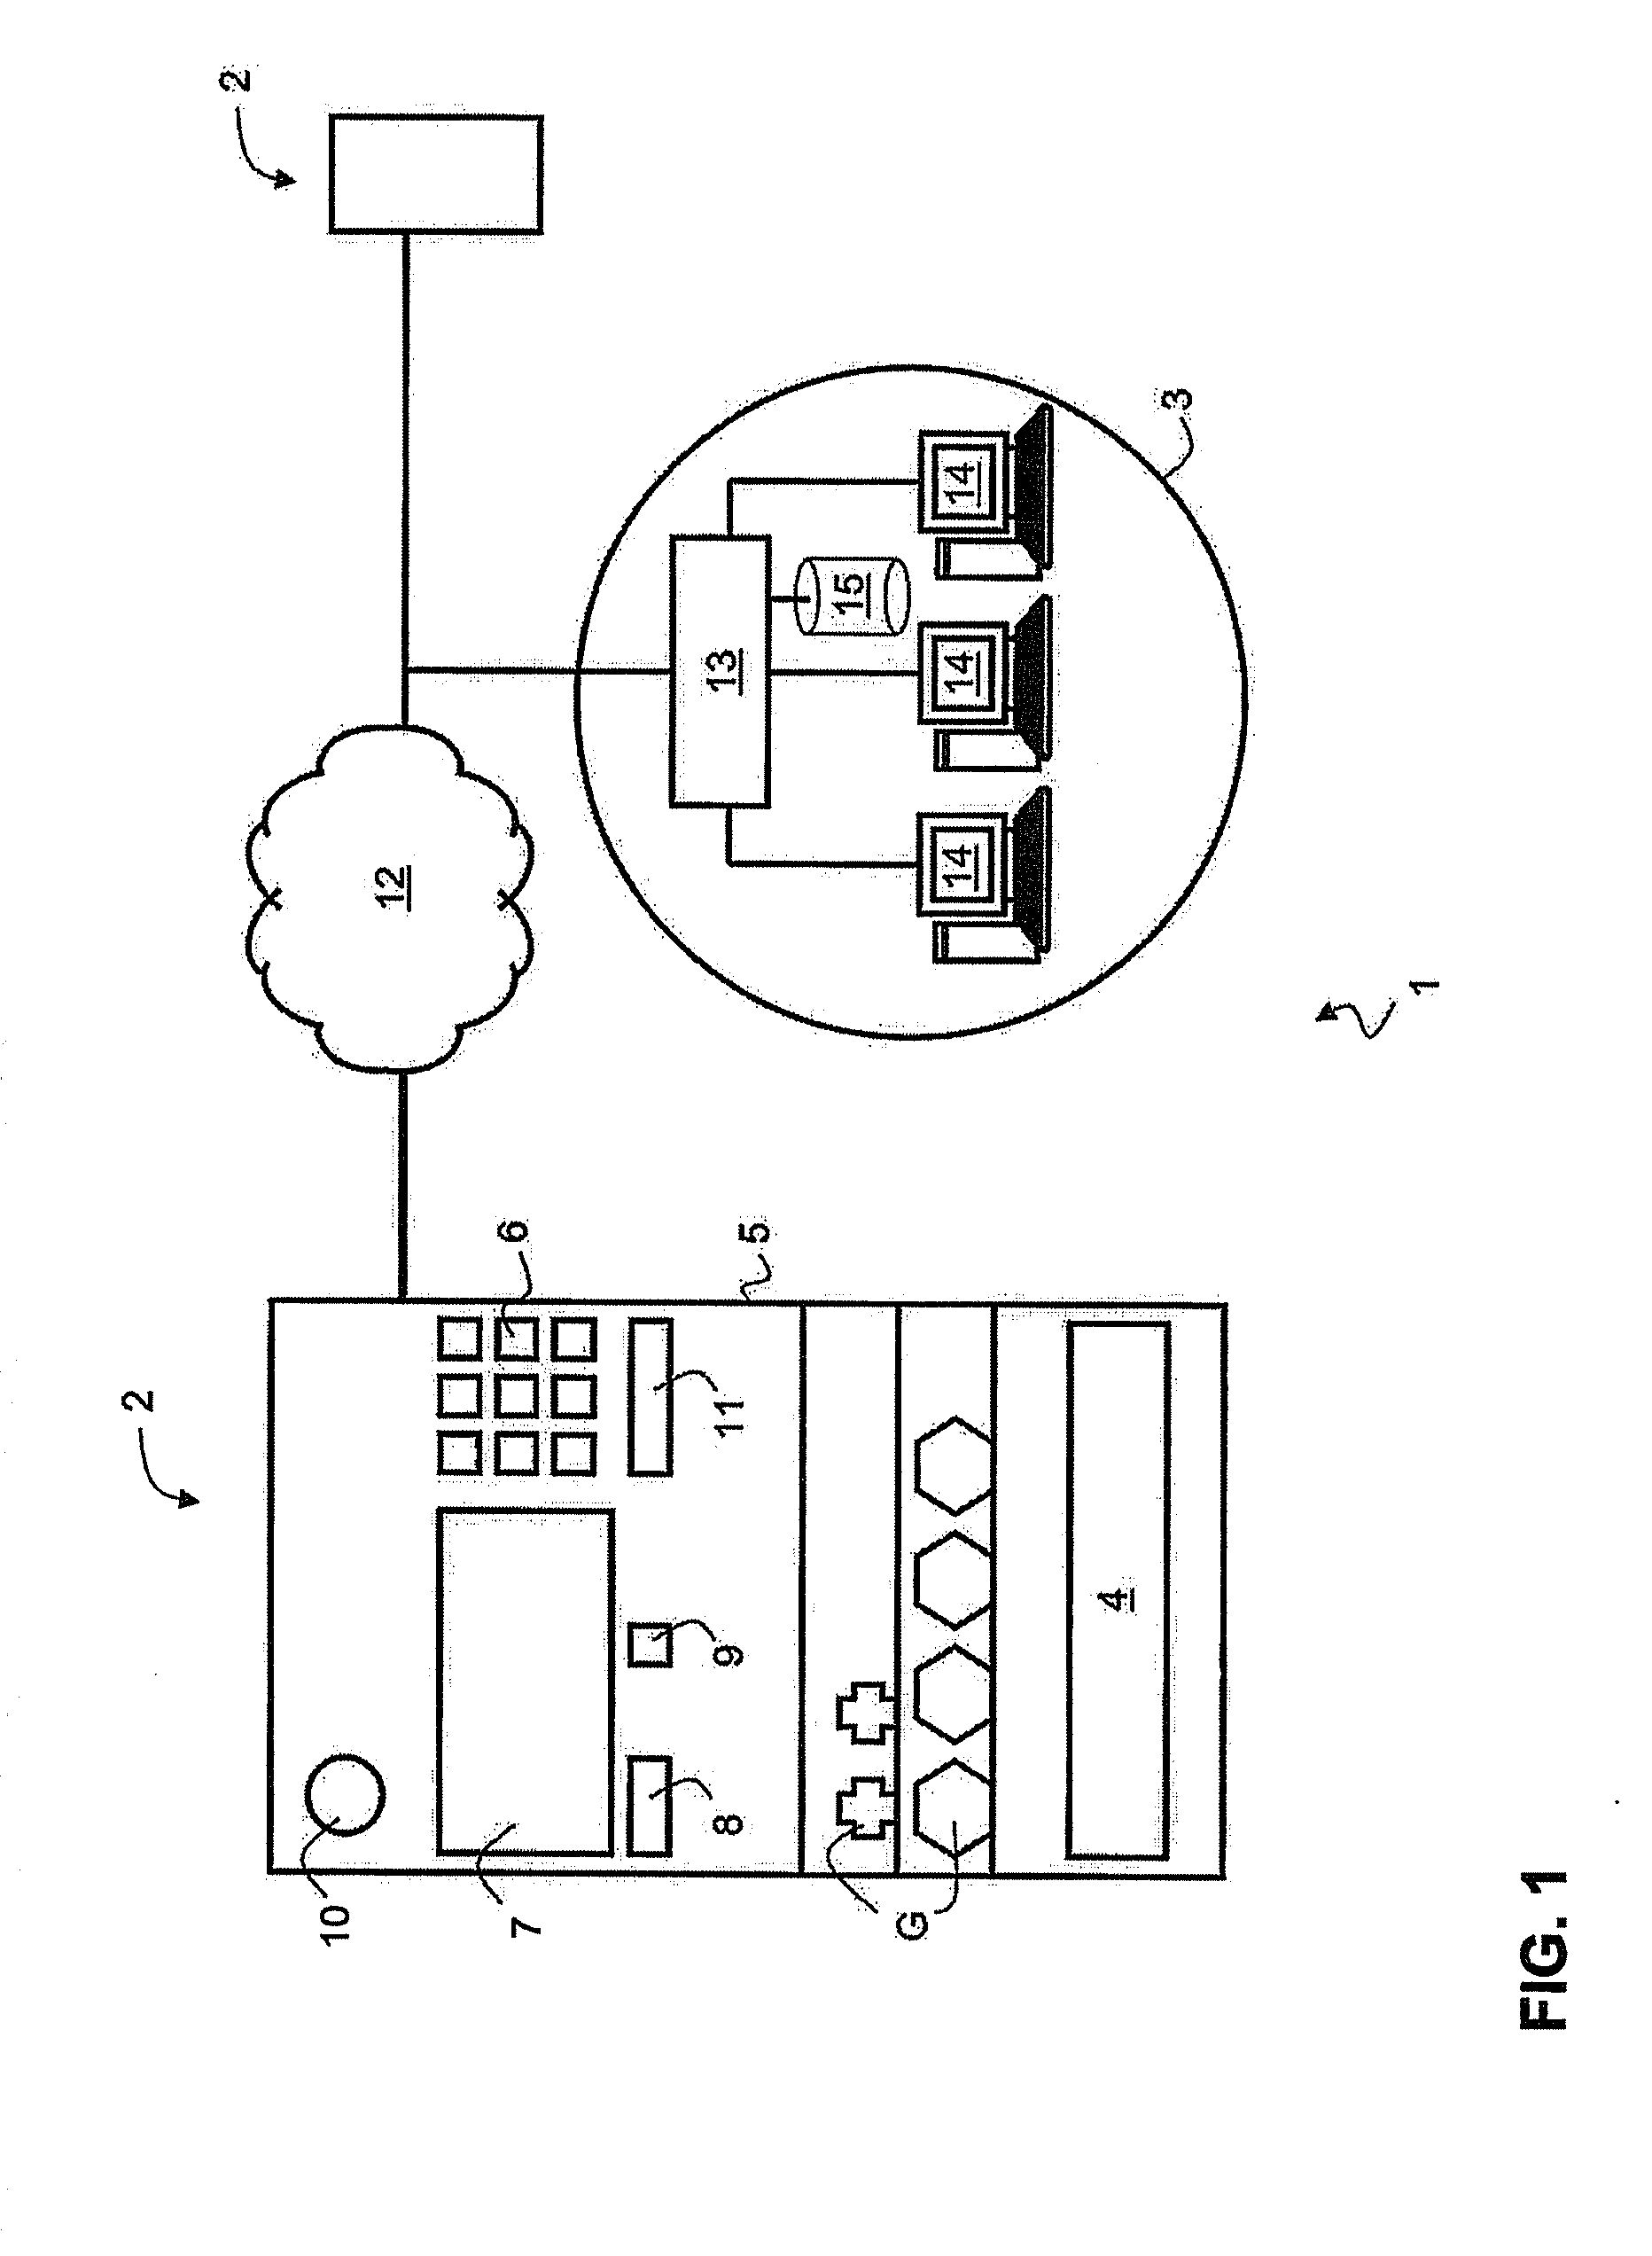 System and method of age verification for selling age-restricted goods from a vending machine